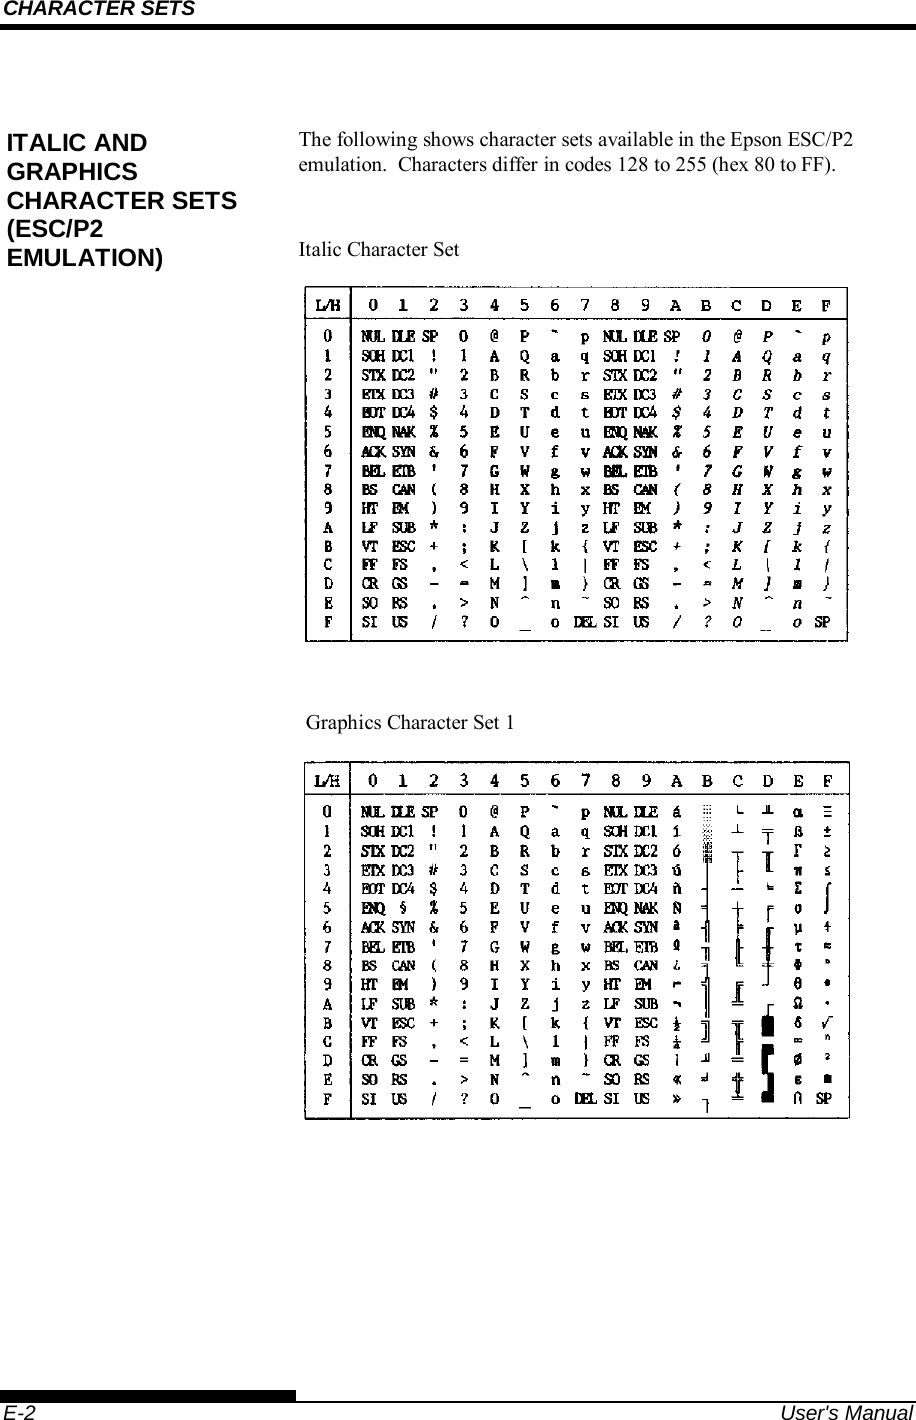 CHARACTER SETS    E-2  User&apos;s Manual  The following shows character sets available in the Epson ESC/P2 emulation.  Characters differ in codes 128 to 255 (hex 80 to FF).  Italic Character Set   Graphics Character Set 1     ITALIC AND GRAPHICS CHARACTER SETS (ESC/P2 EMULATION) 